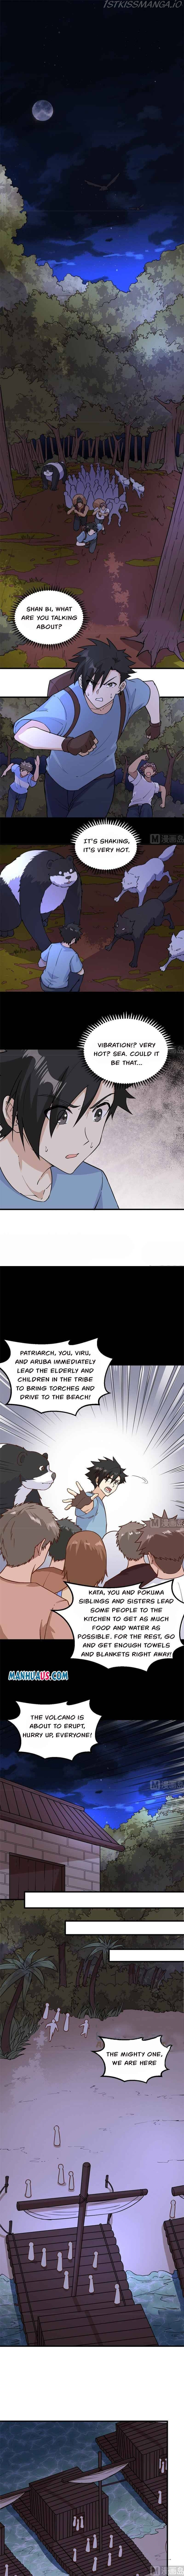 Survive on a deserted island with beautiful girls Chapter 142 - Page 2